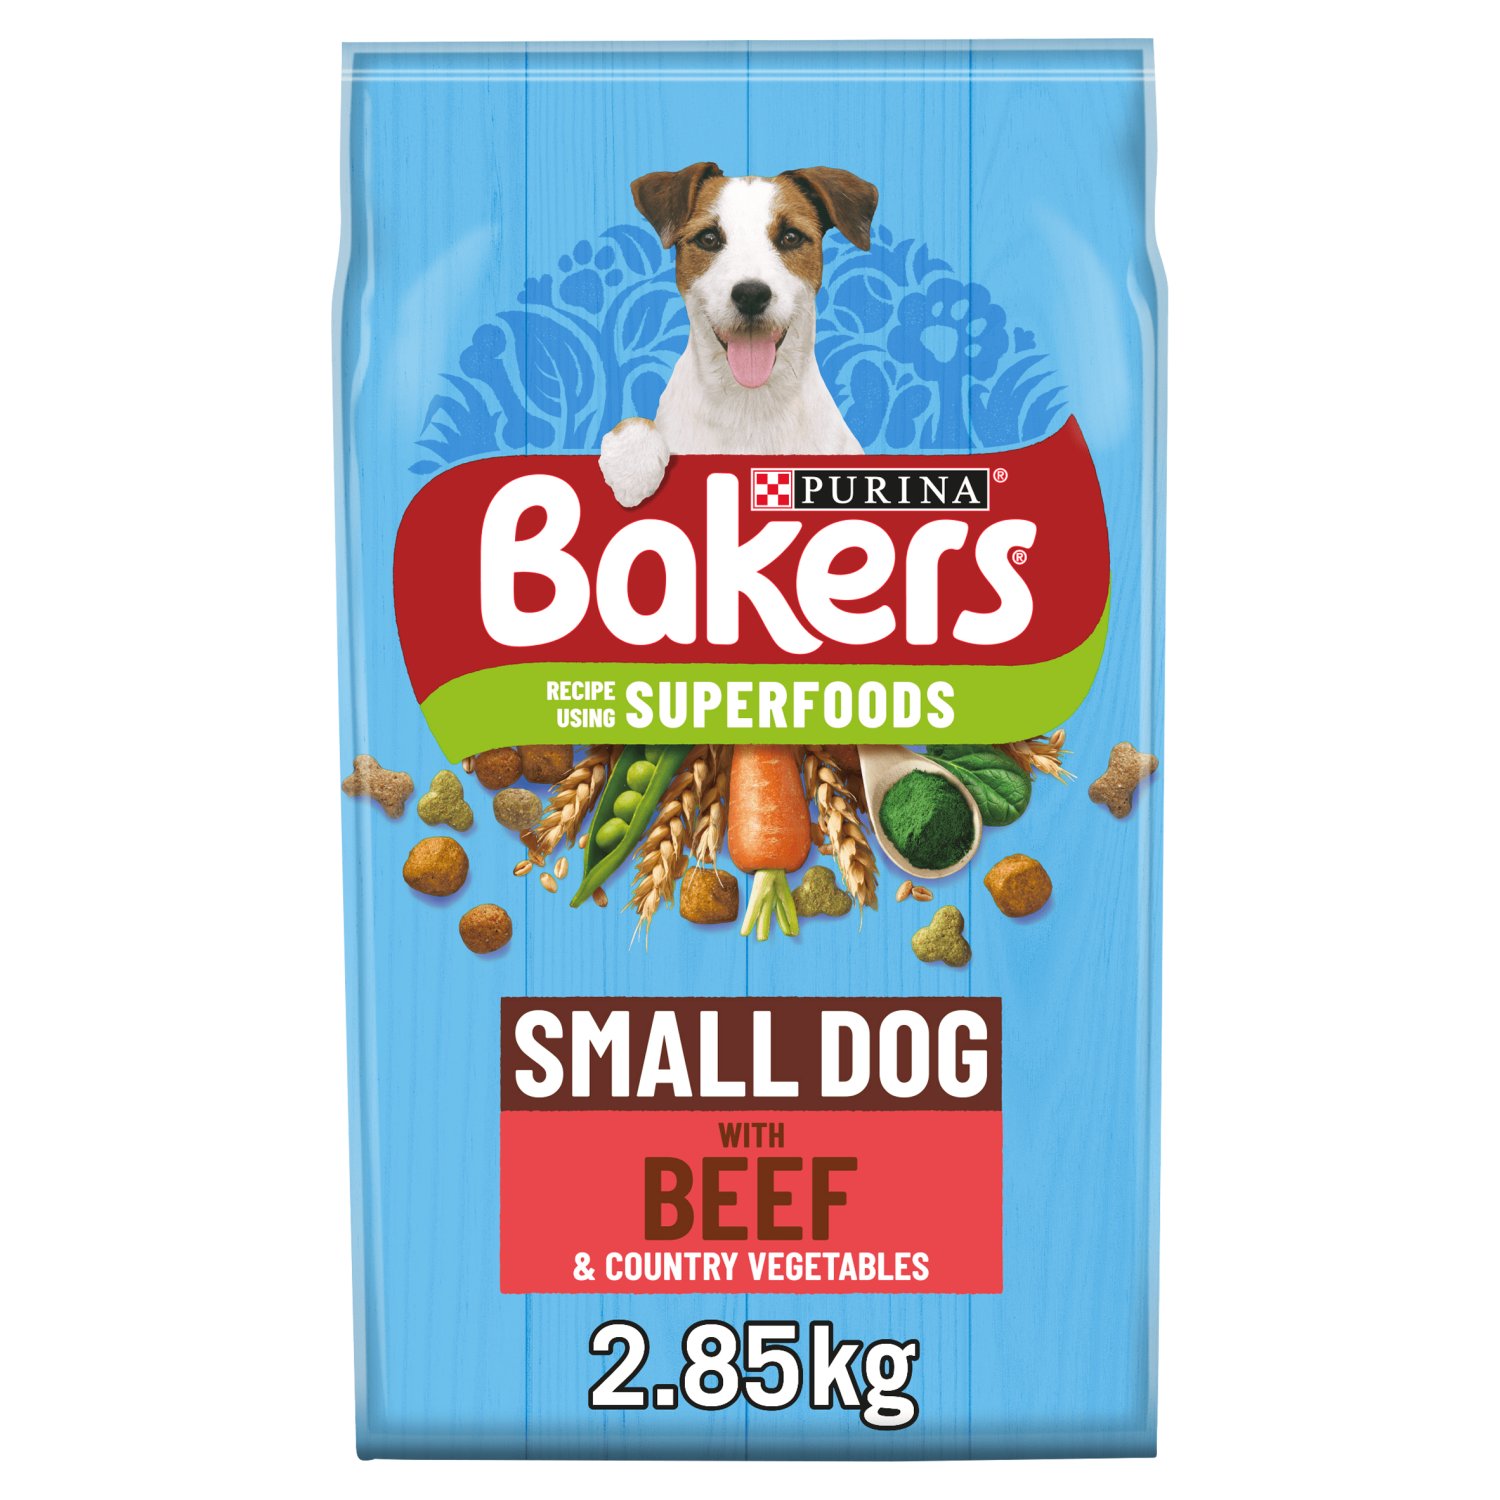 Bakers Beef & Vegetable Small Dog Food (2.85 kg)